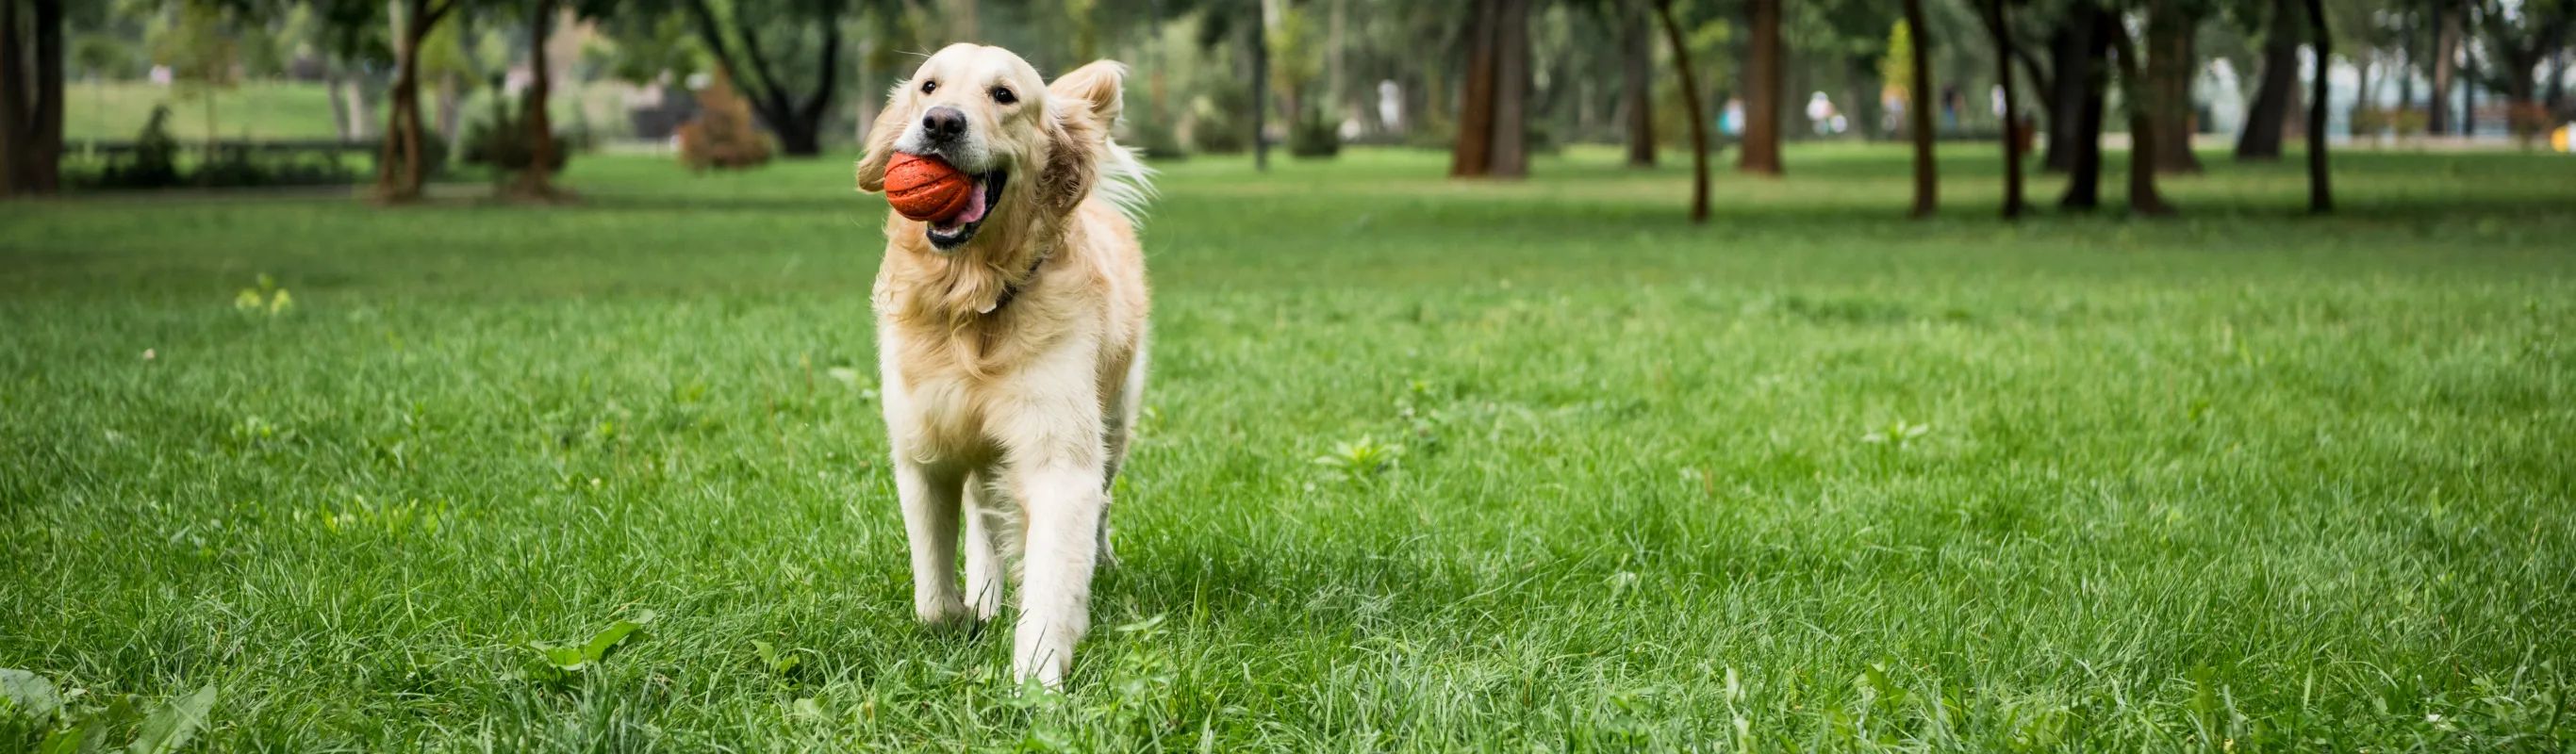 dog with ball in mouth running on grass